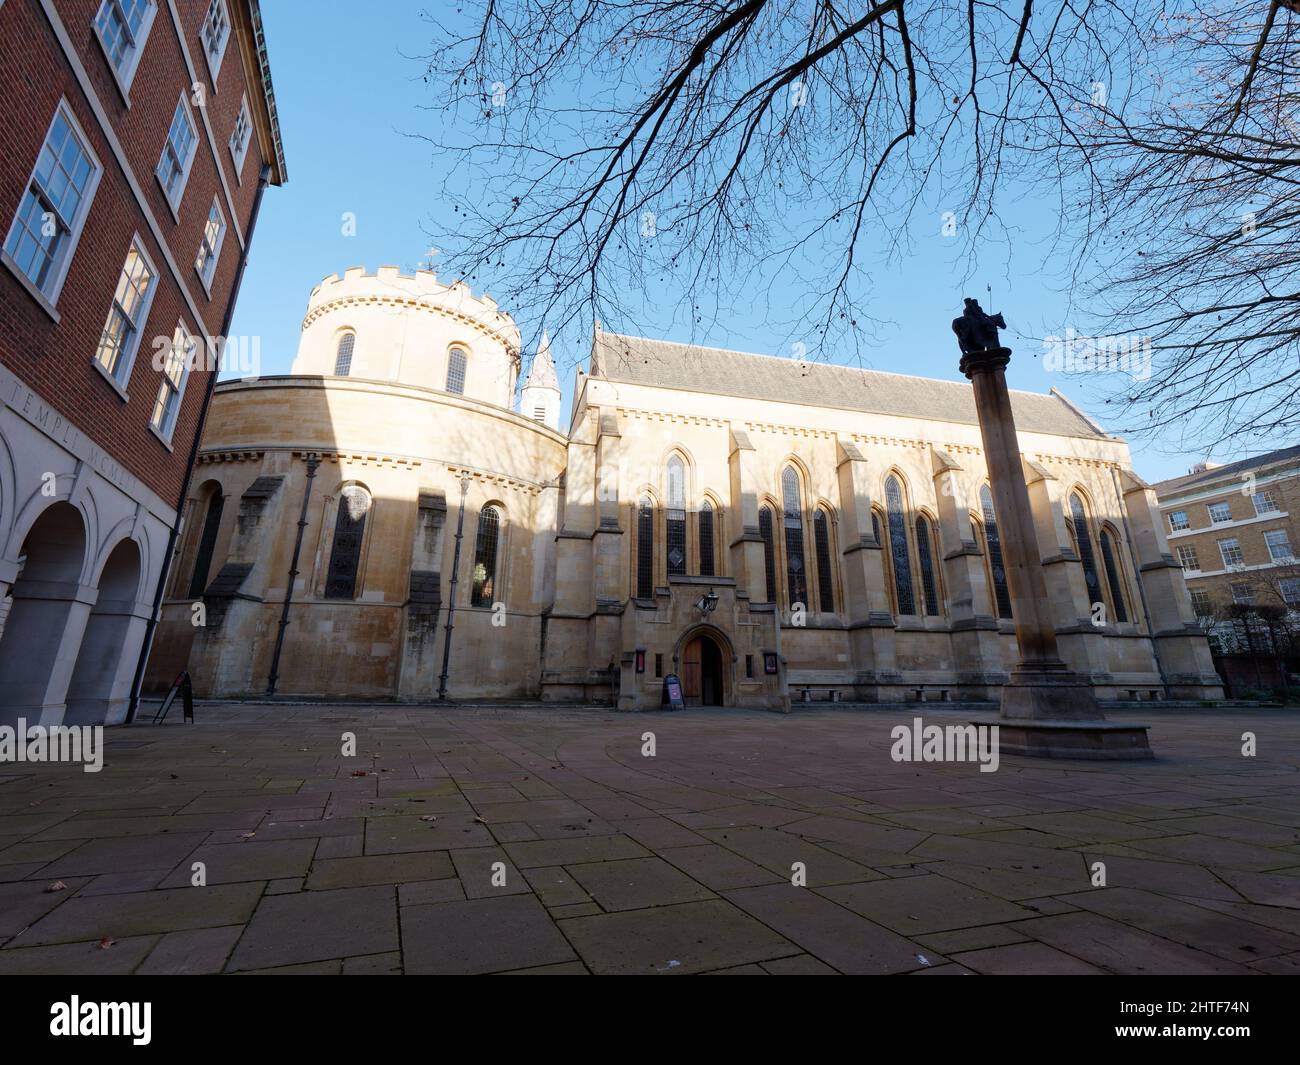 London, Greater London, England, January 05 2022: Side view with entrance of Temple Church built by the Knights Templar. Stock Photo